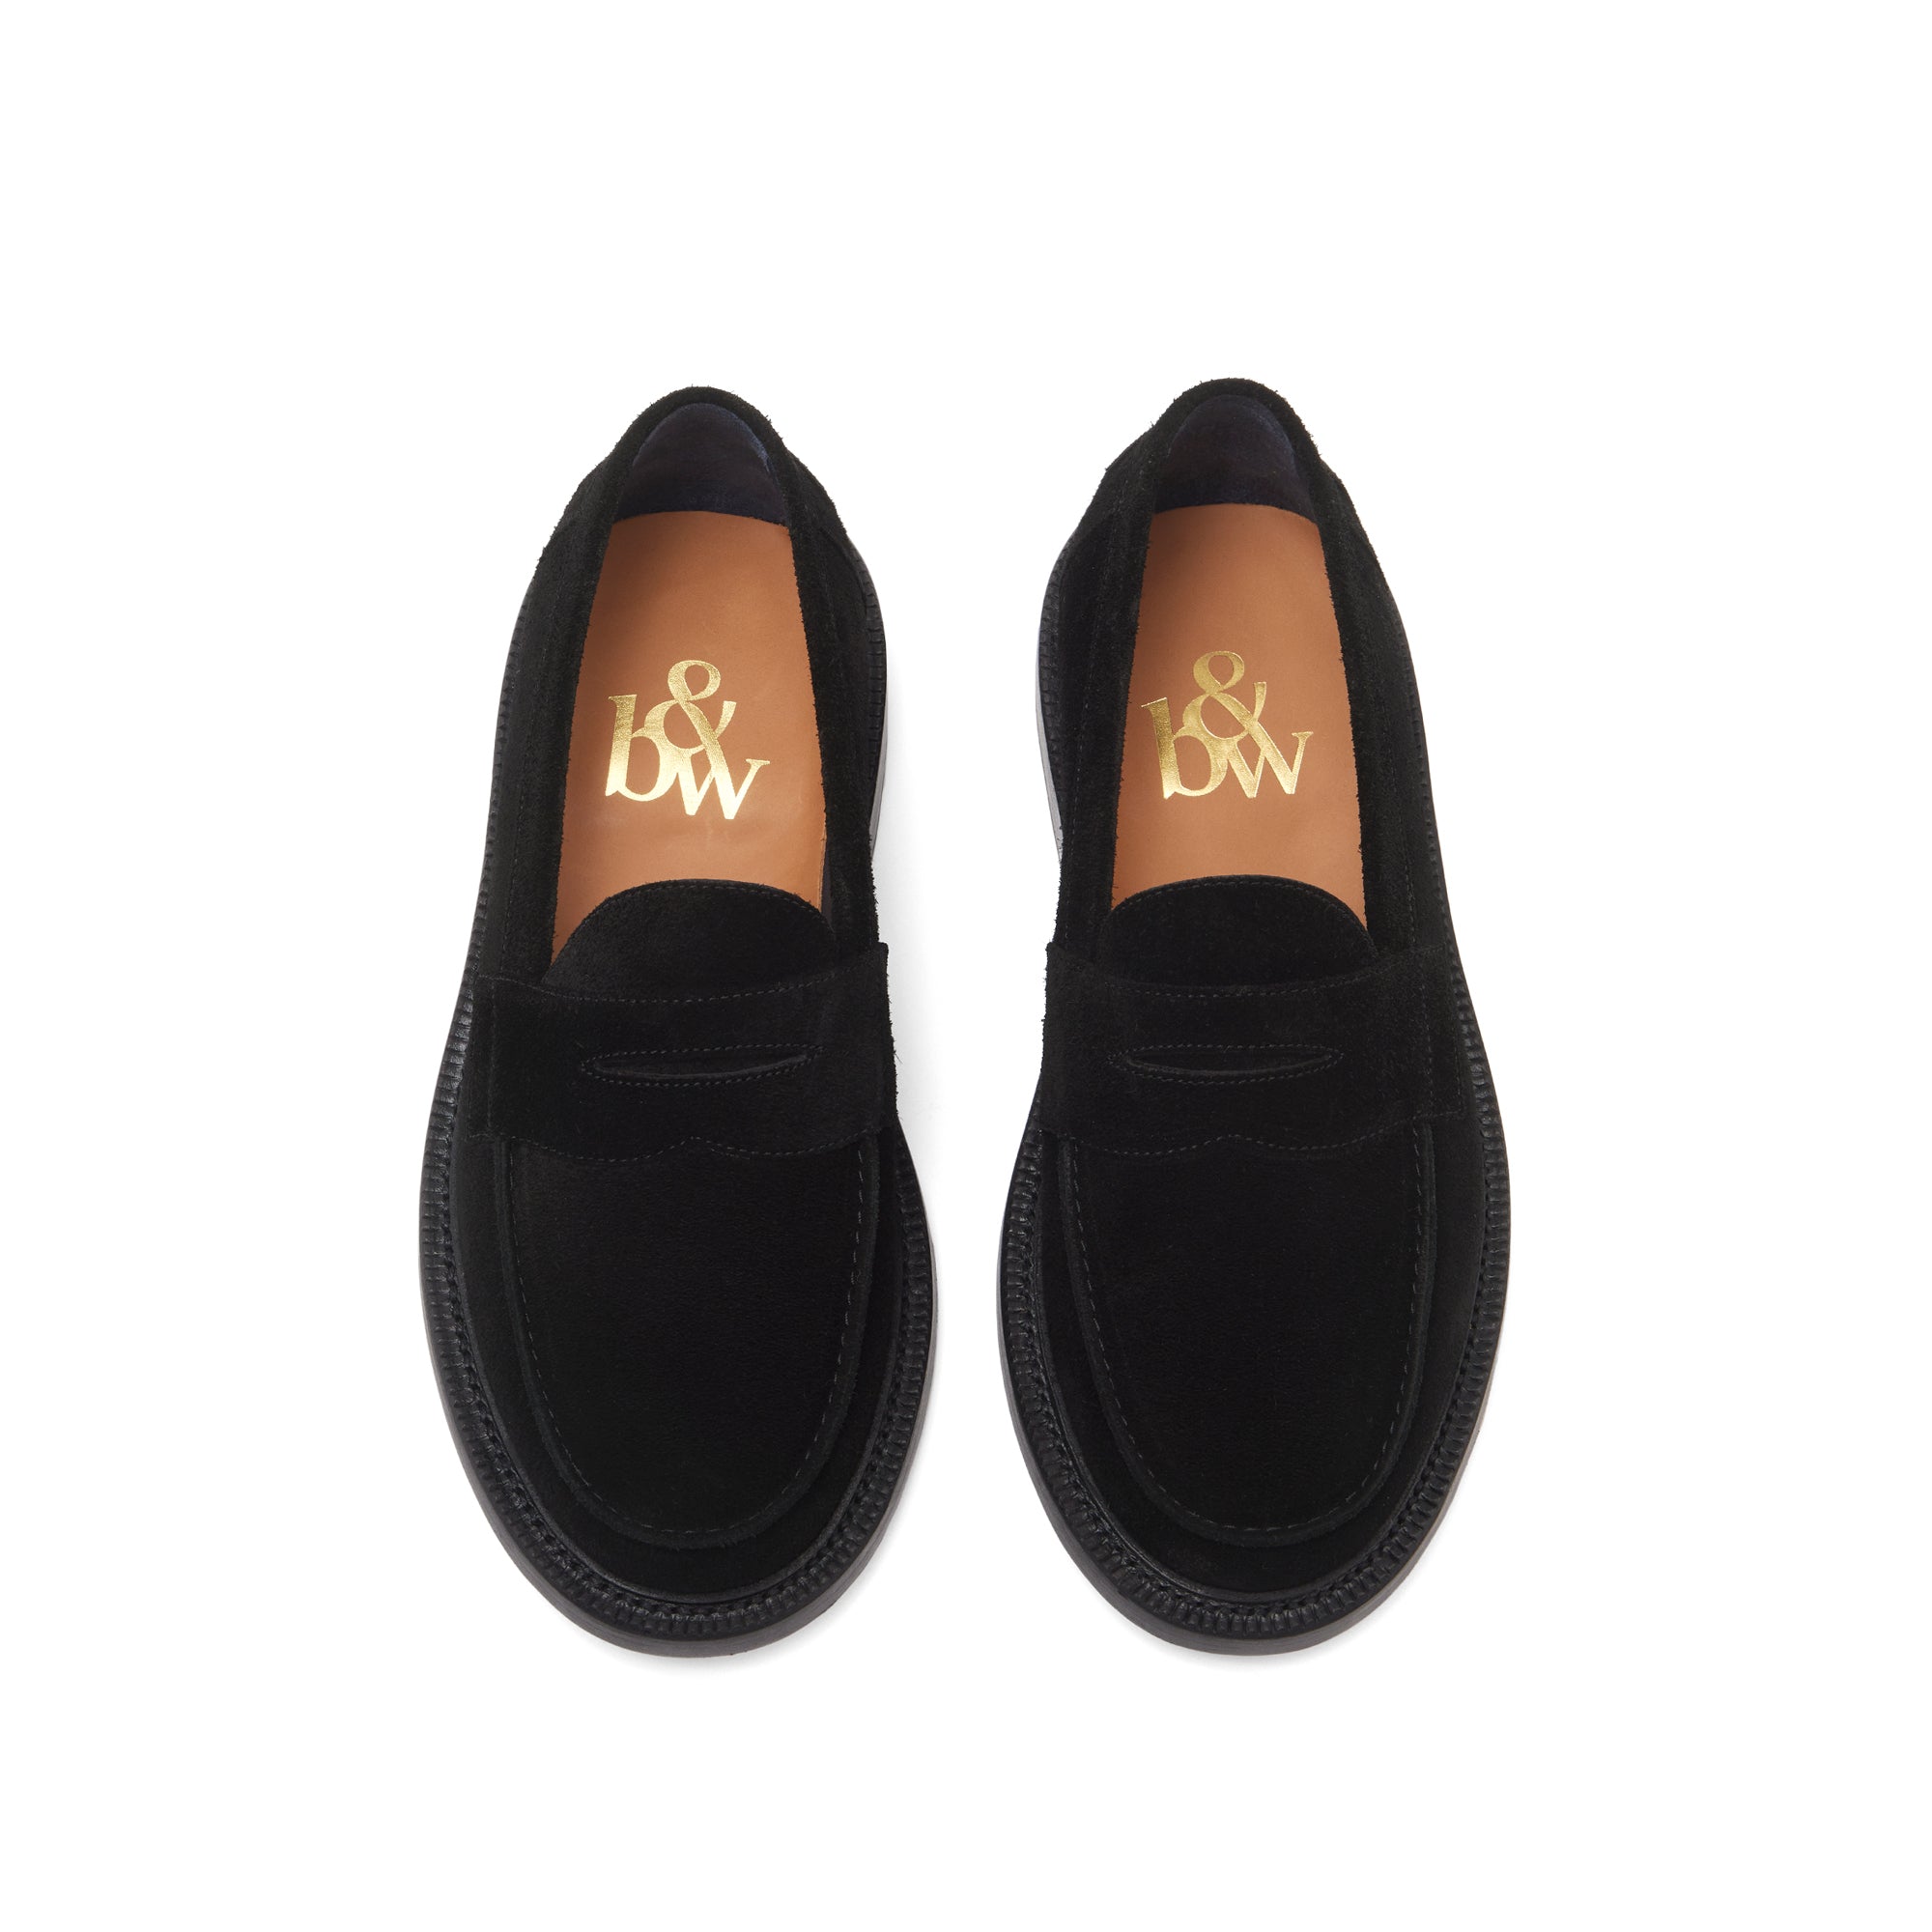 The Ellis Penny Loafer, Midnight